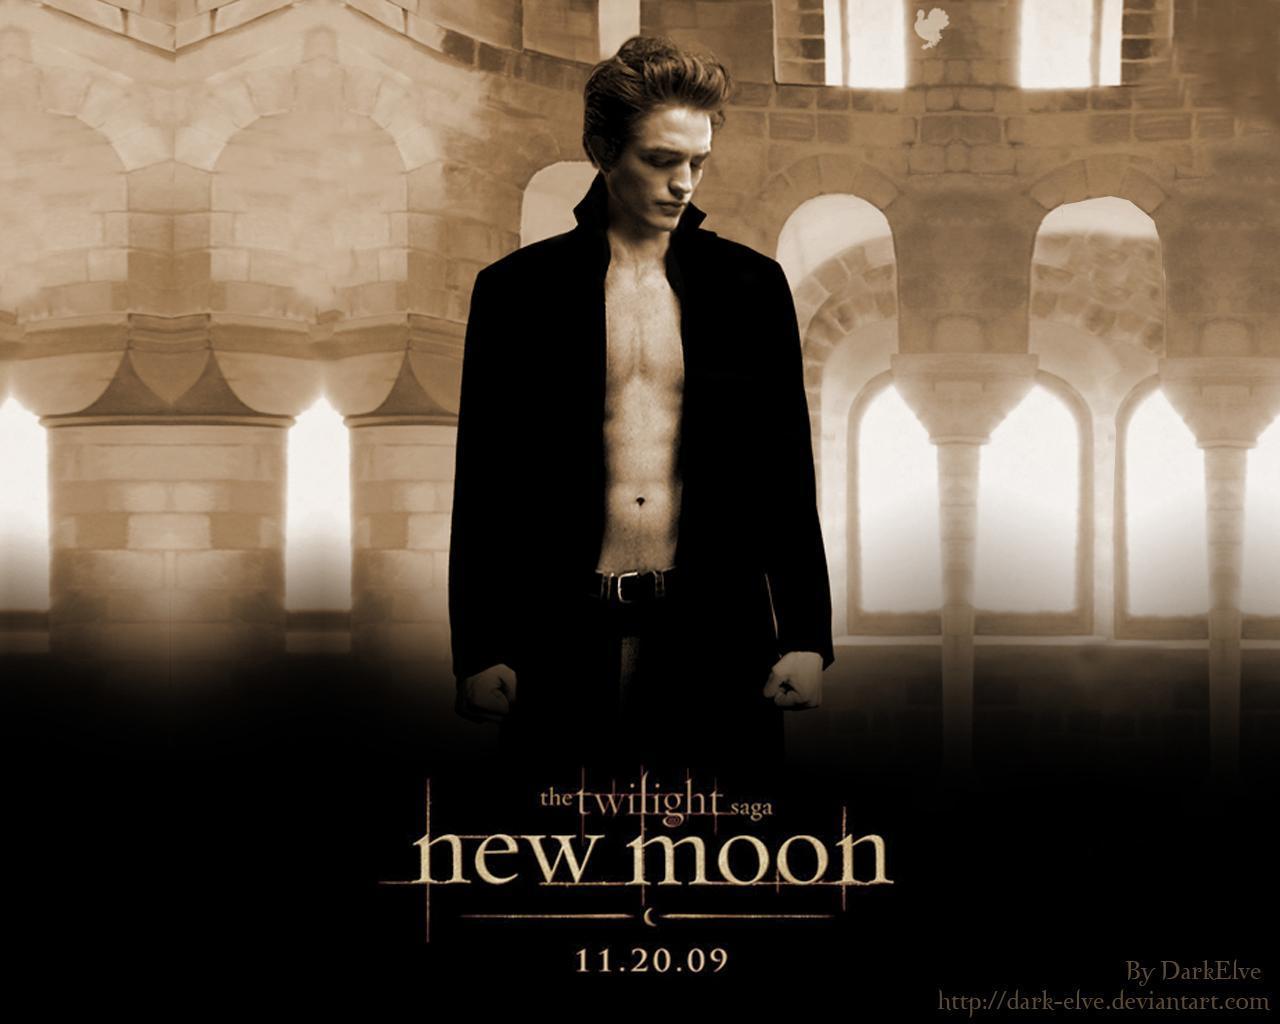 image For > Edward Cullen Wallpaper New Moon